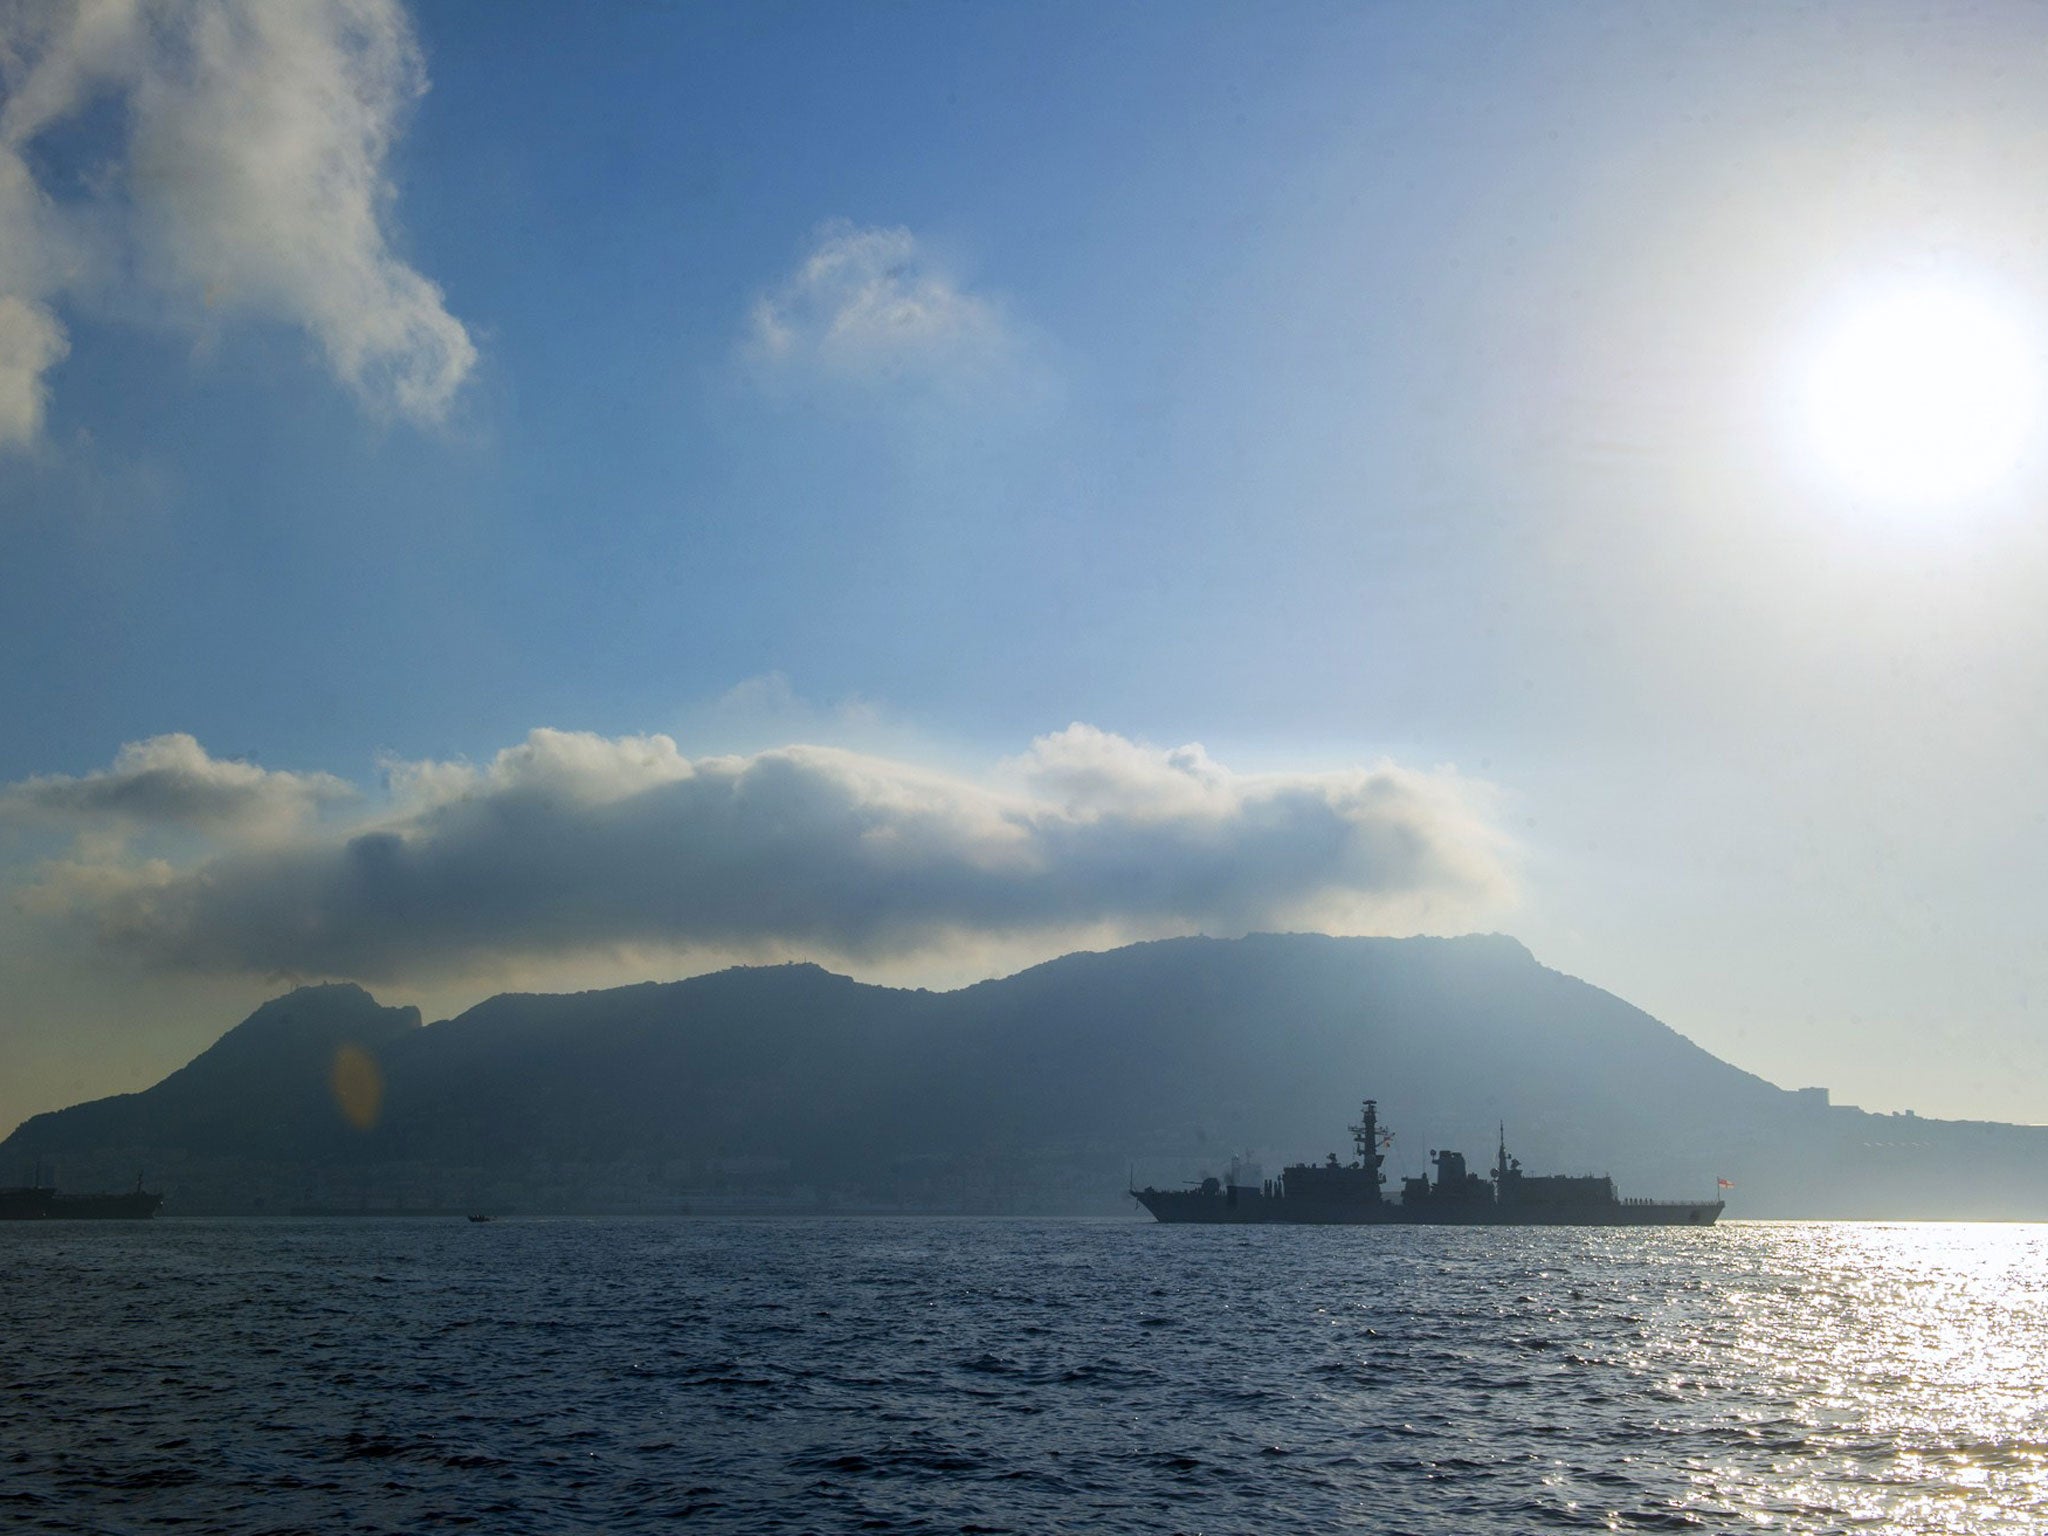 British frigate HMS Westminster arrives in Gibraltar ahead of a naval exercise coinciding with a furious diplomatic row with Spain over sovereignty and fishing rights